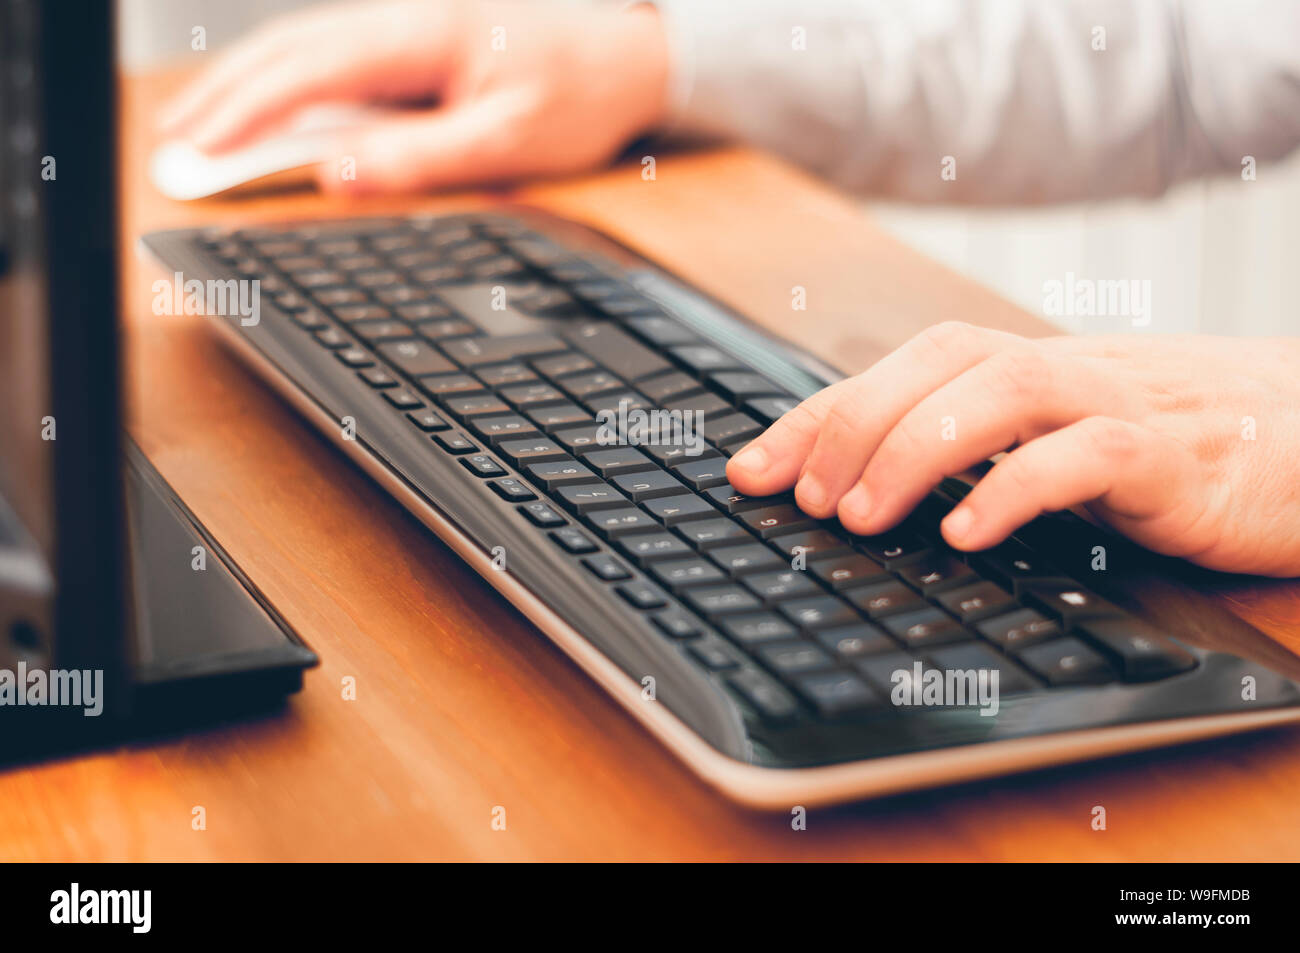 Man using computer, buy things online, searching informations or work at home. Soft focus image color graded Stock Photo